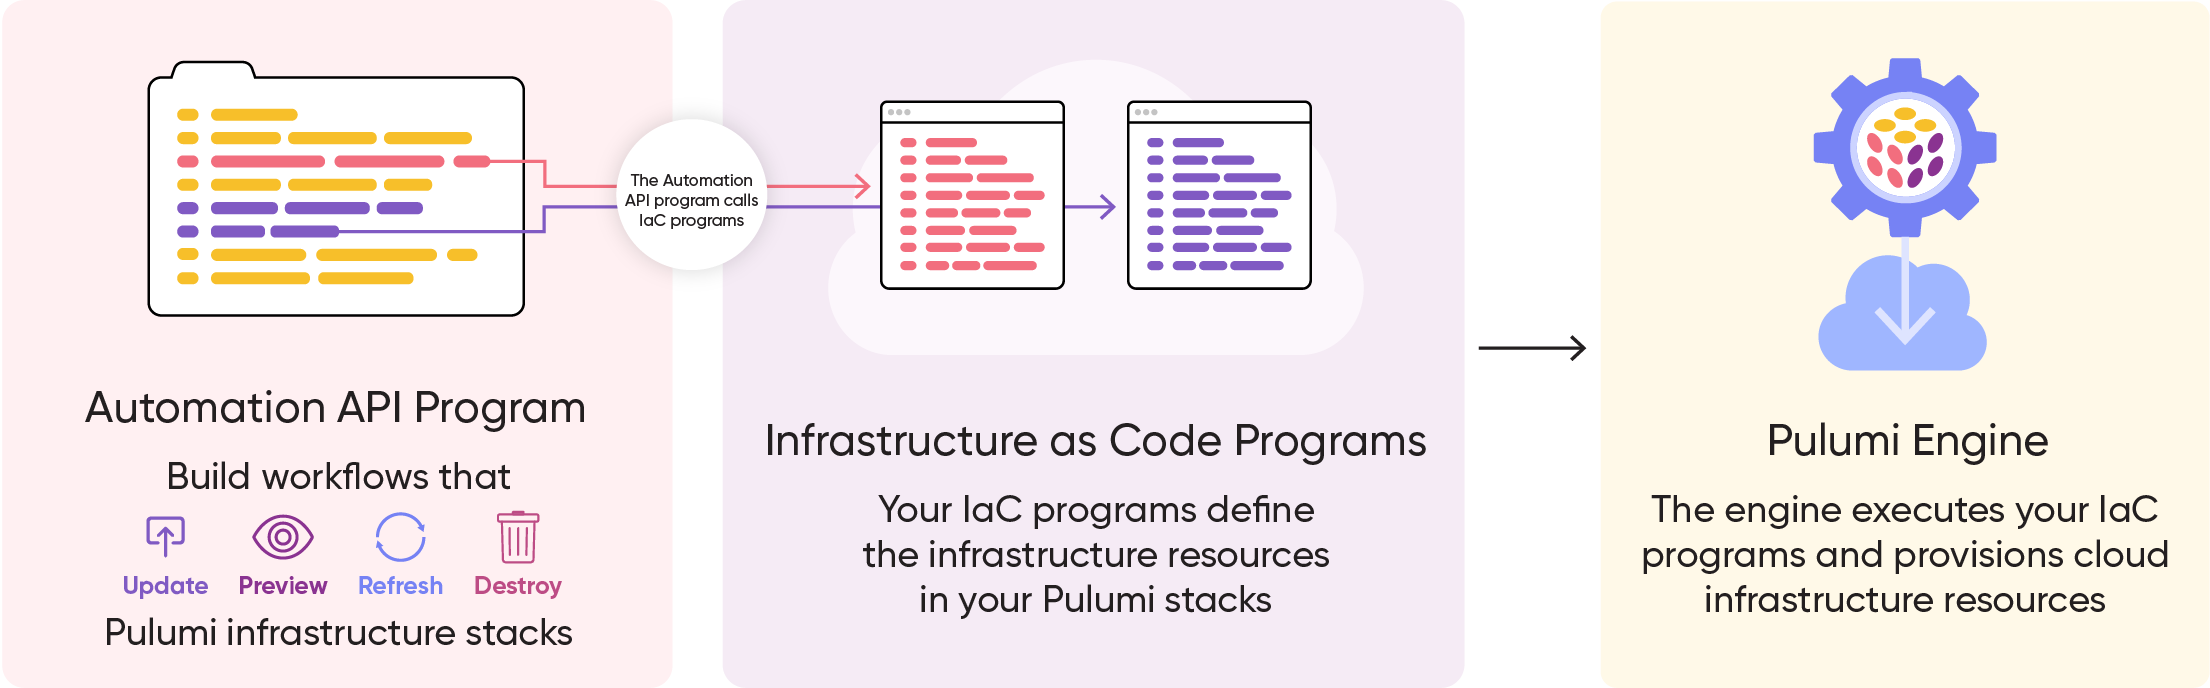 Pulumi infrastructure as code example